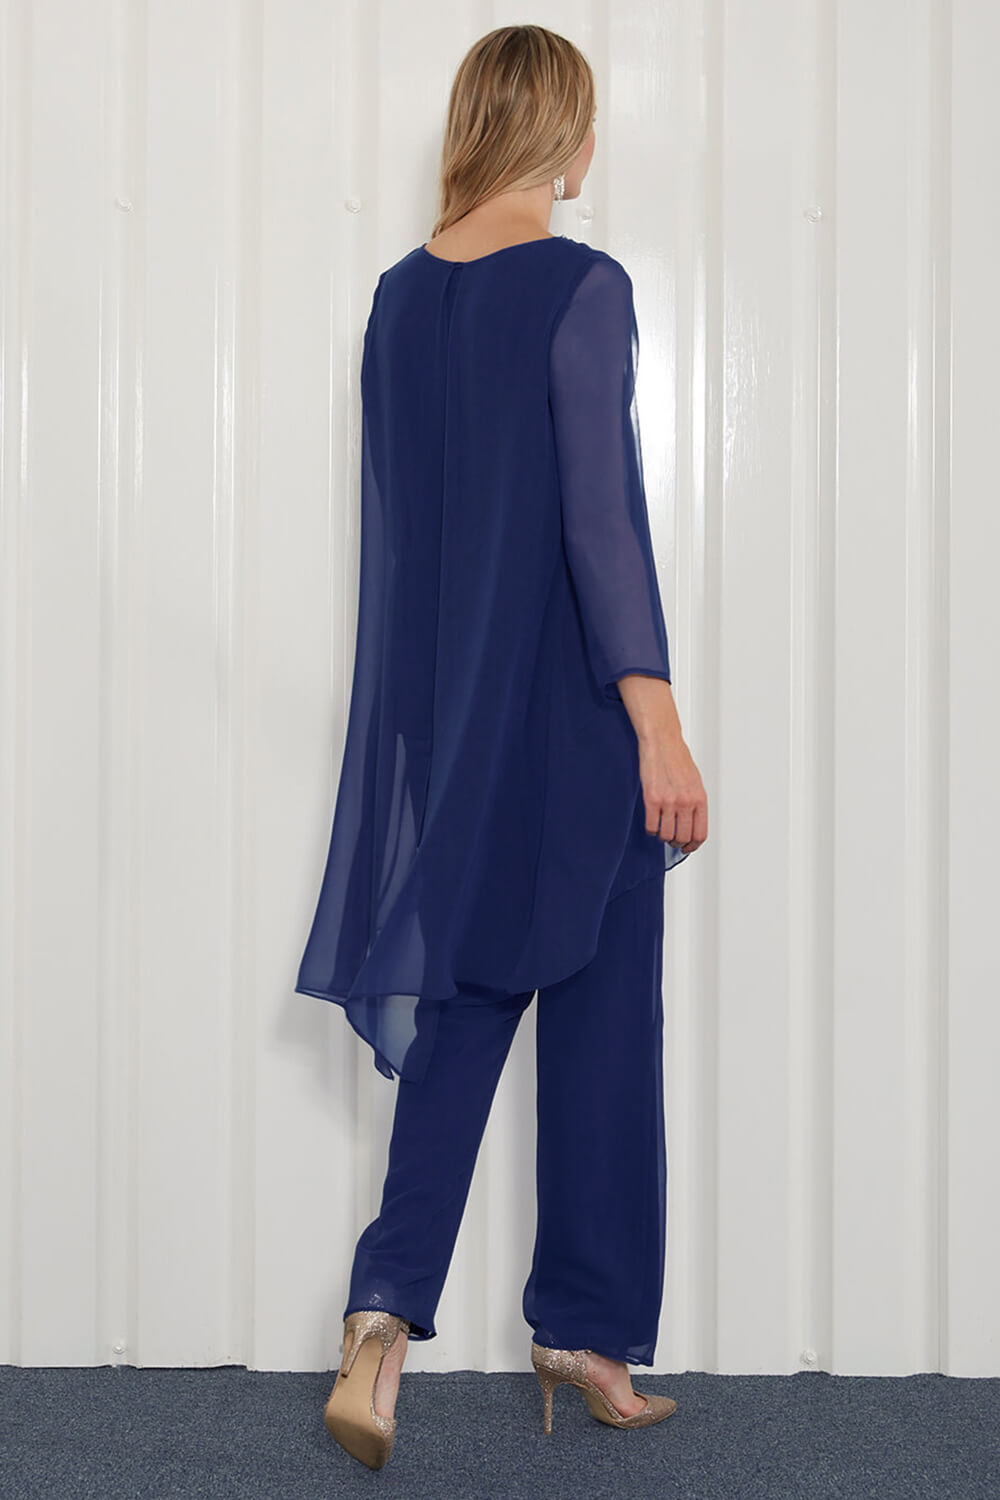 Embellished Top and Chiffon Coat Trouser Suit. 29519 - Catherines of Partick